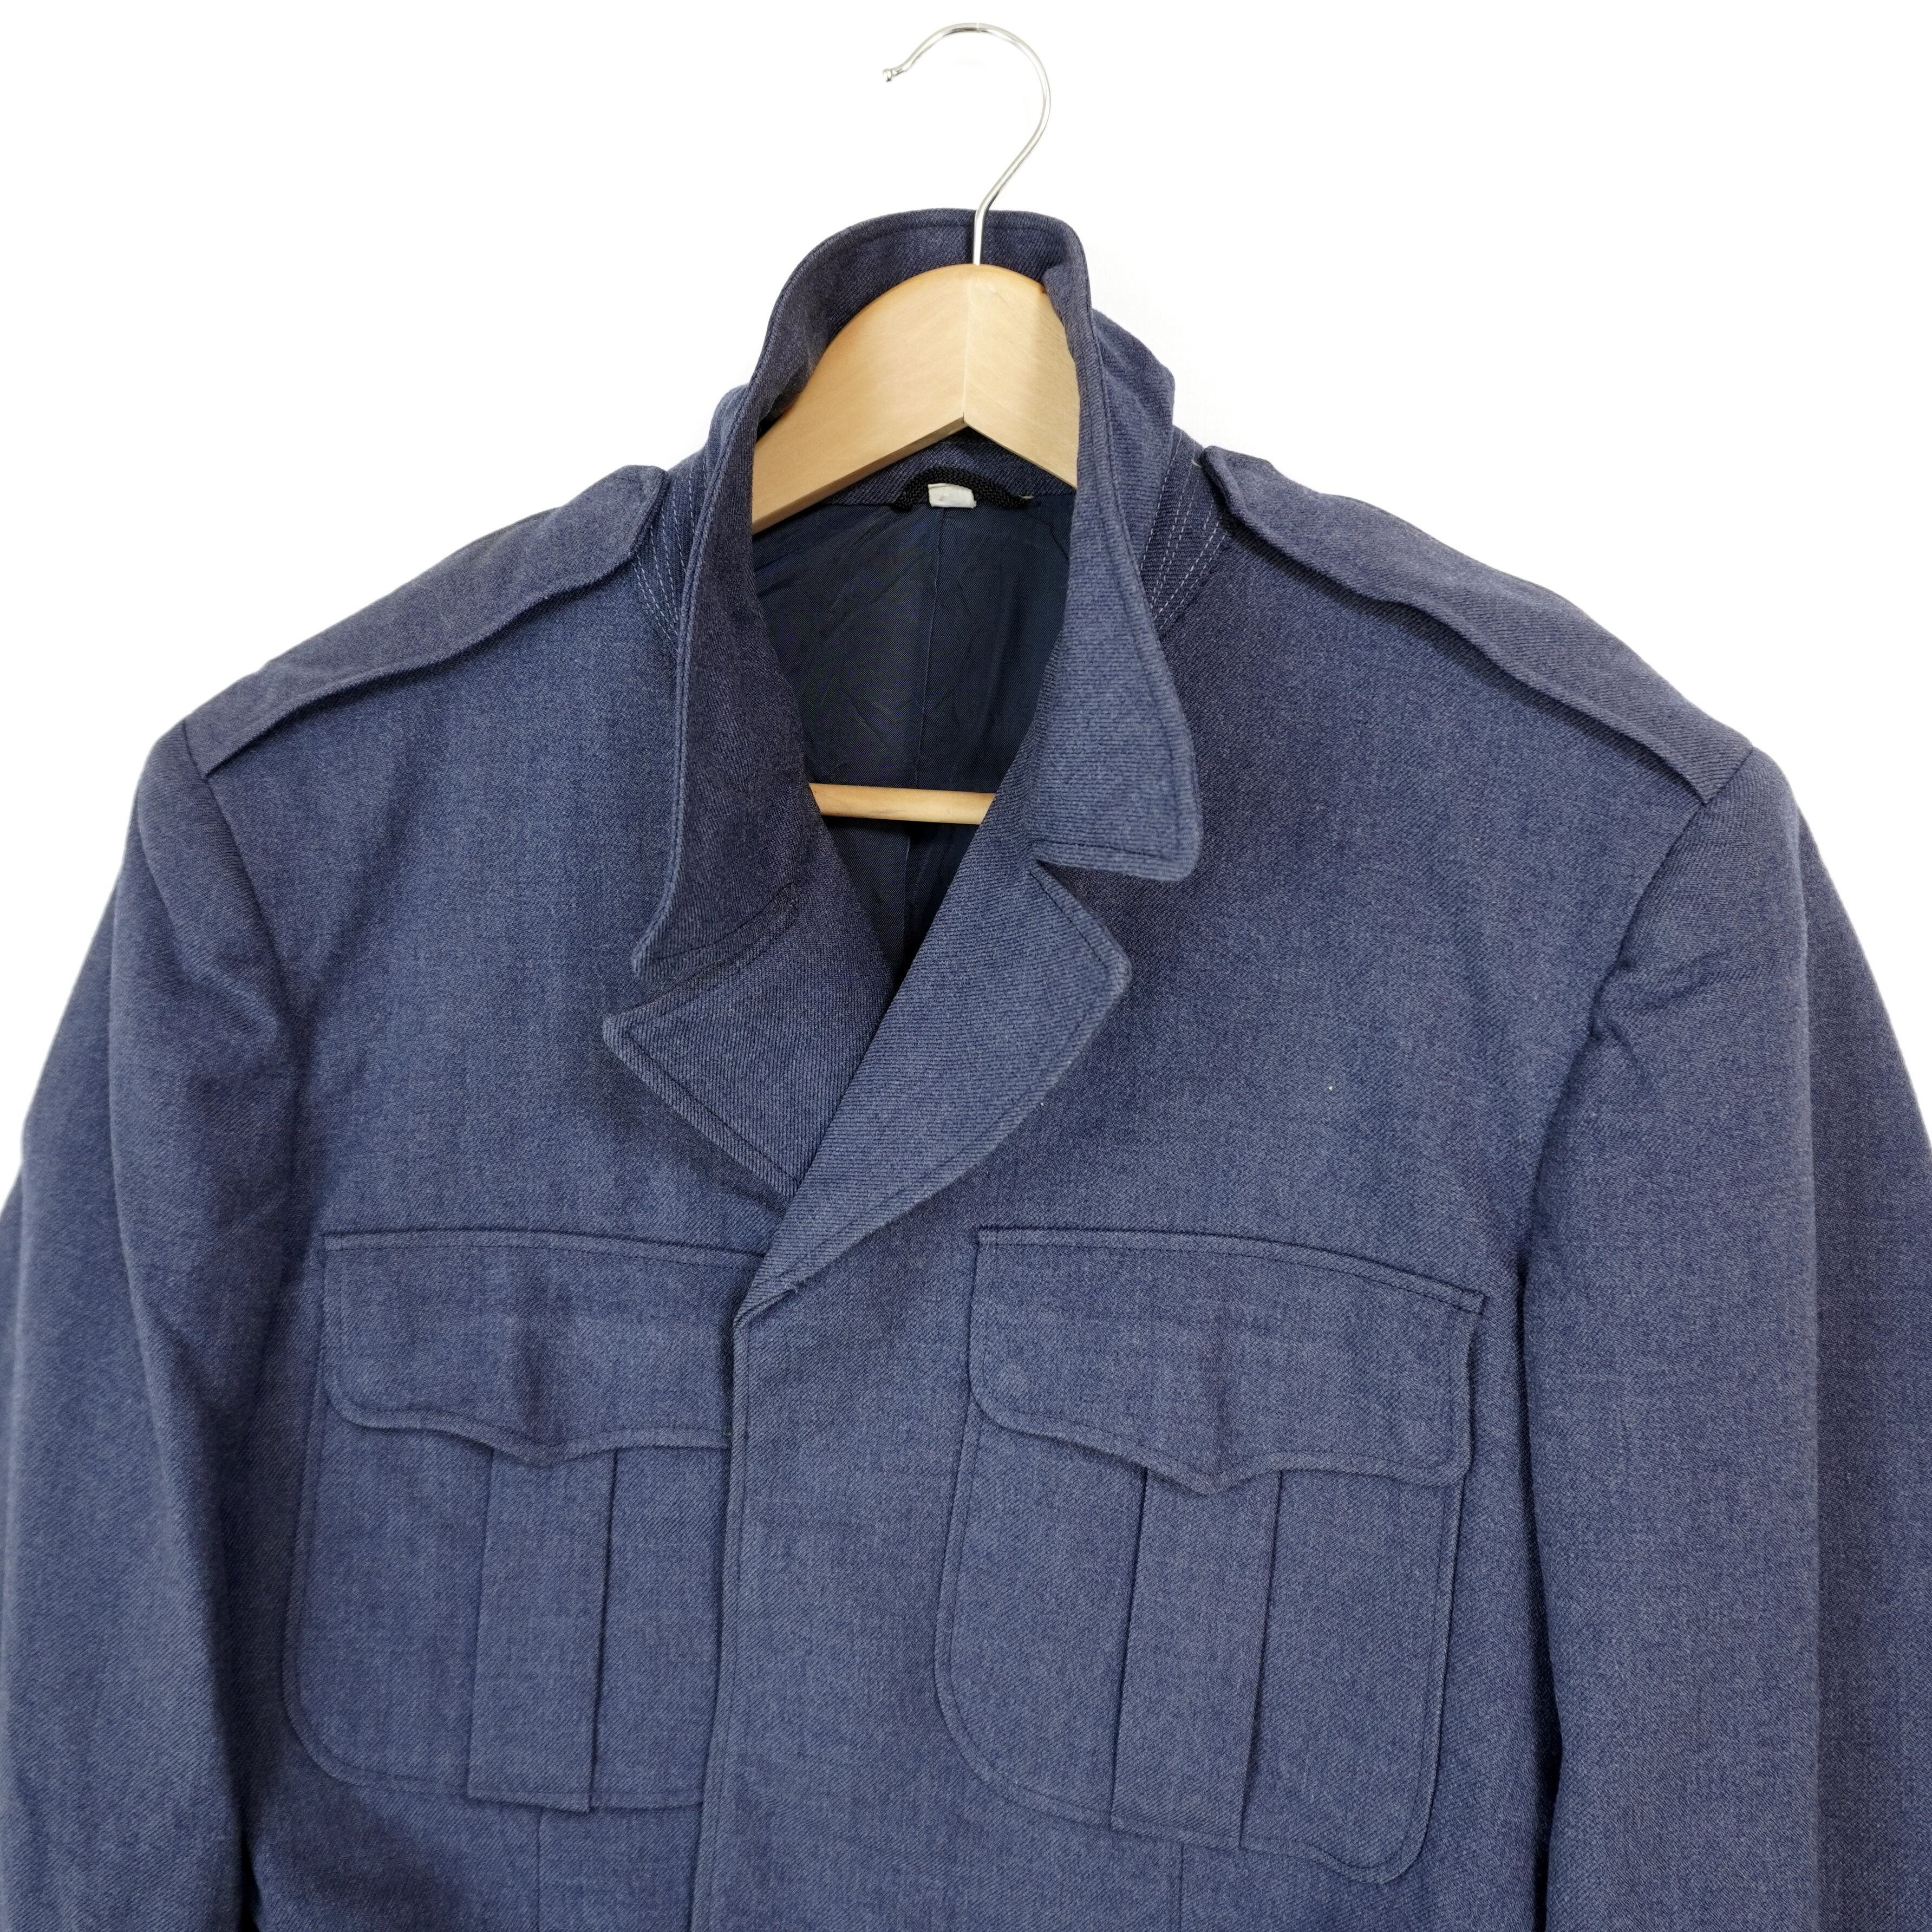 US AIR FORCE M-1950 IKE JACKET 1951s 40R